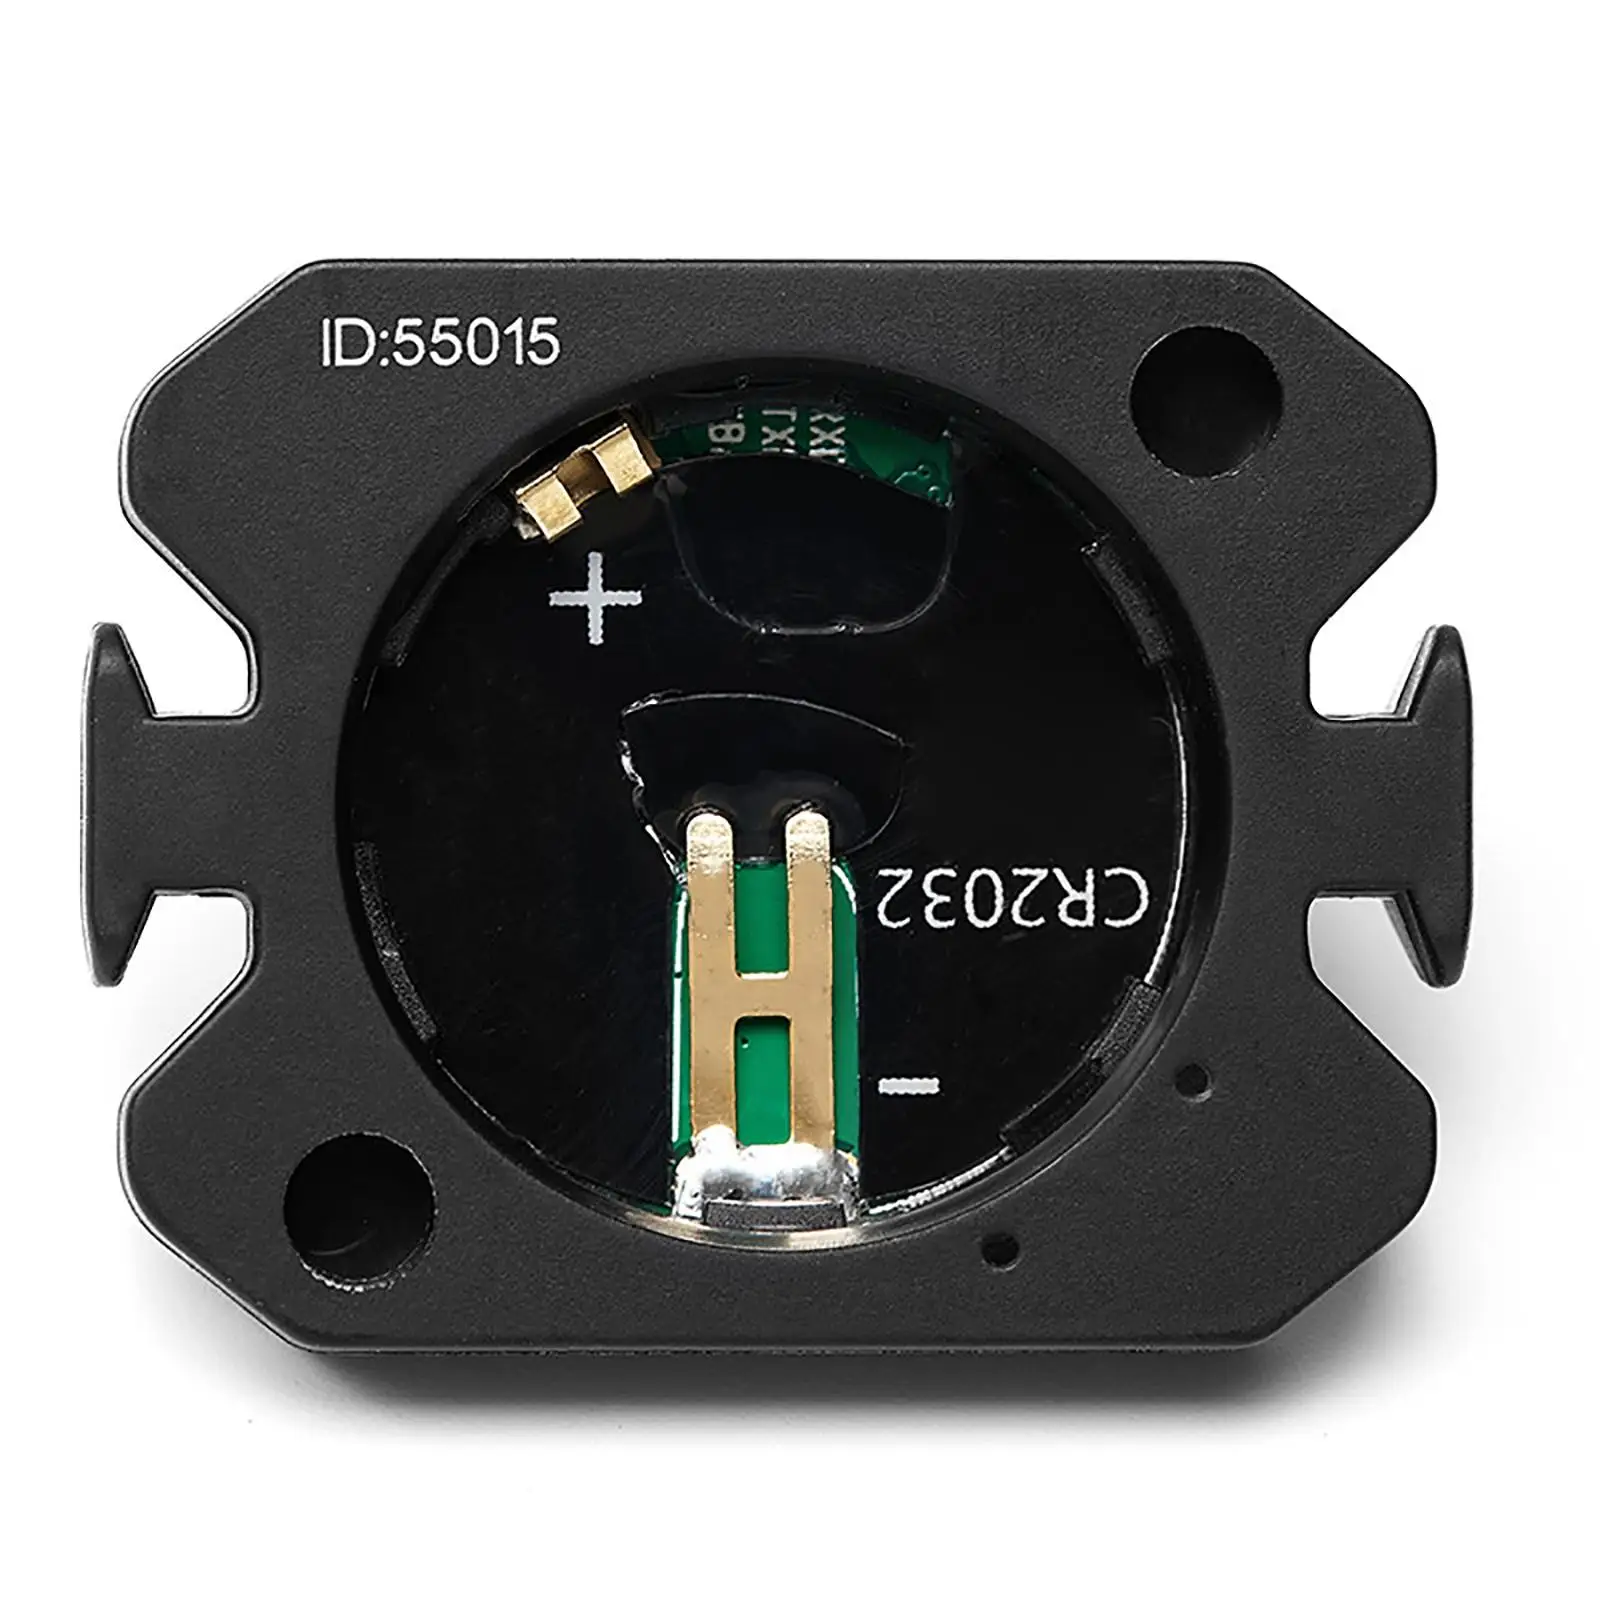 x1 Computer Speedometer ANT+ Bluetooth Speed Cadence Sensor for Bicycle Electronics Parts